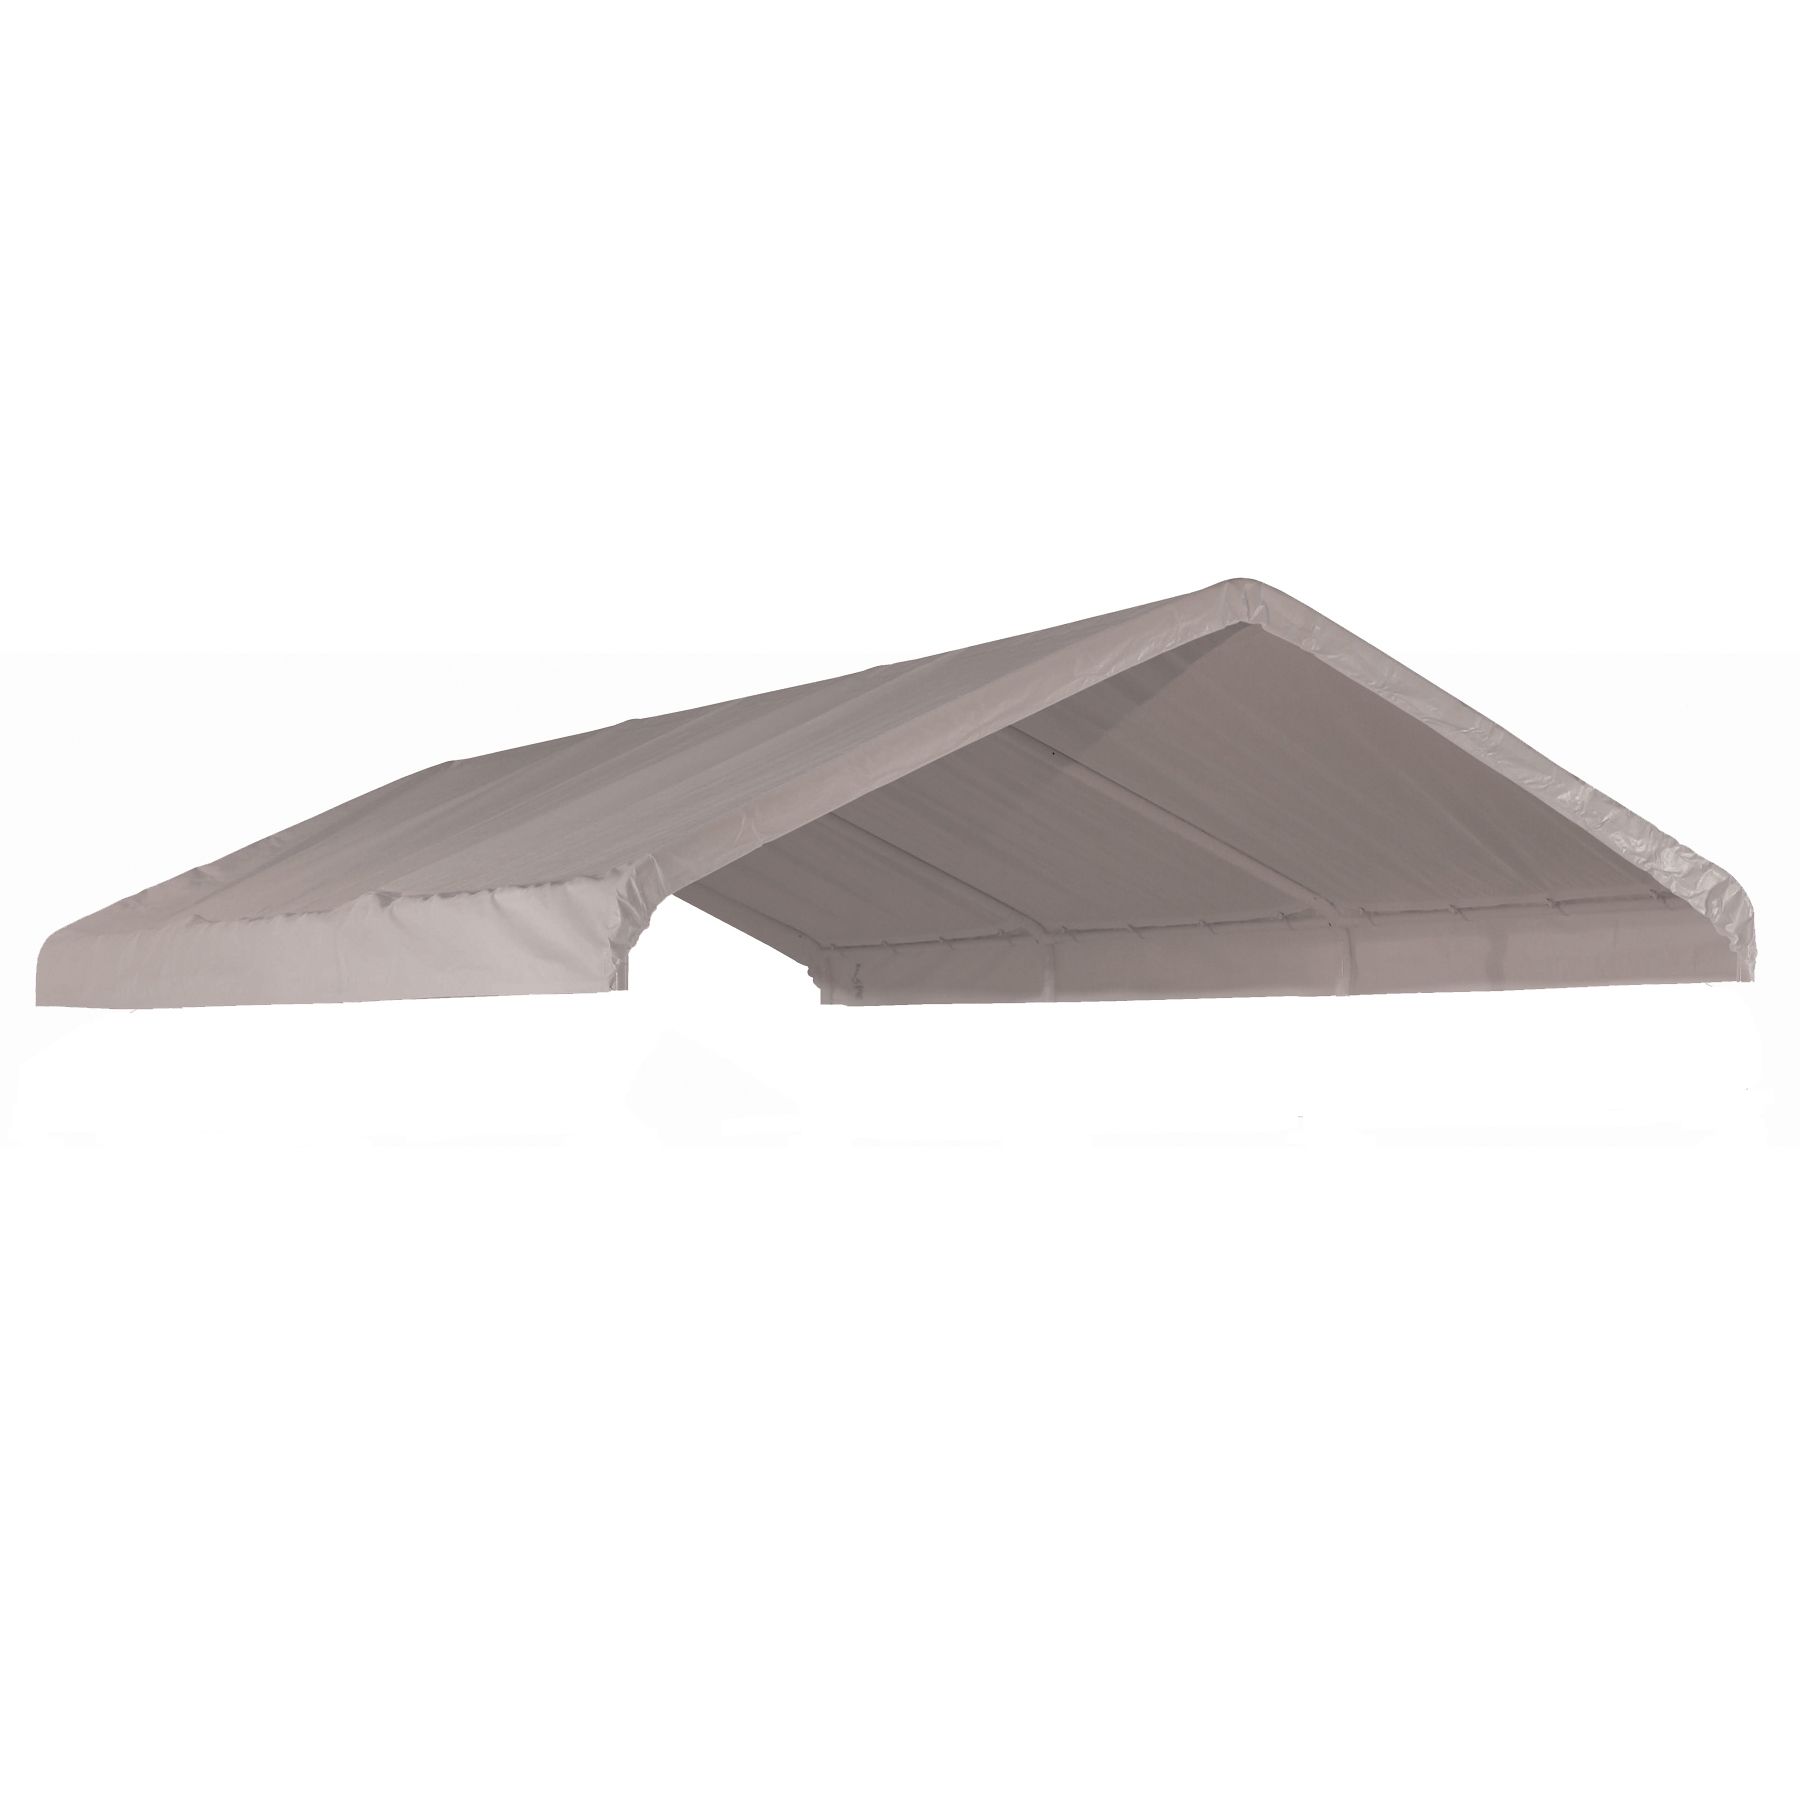 ShelterLogic 10x20 Canopy - White Replacement Cover